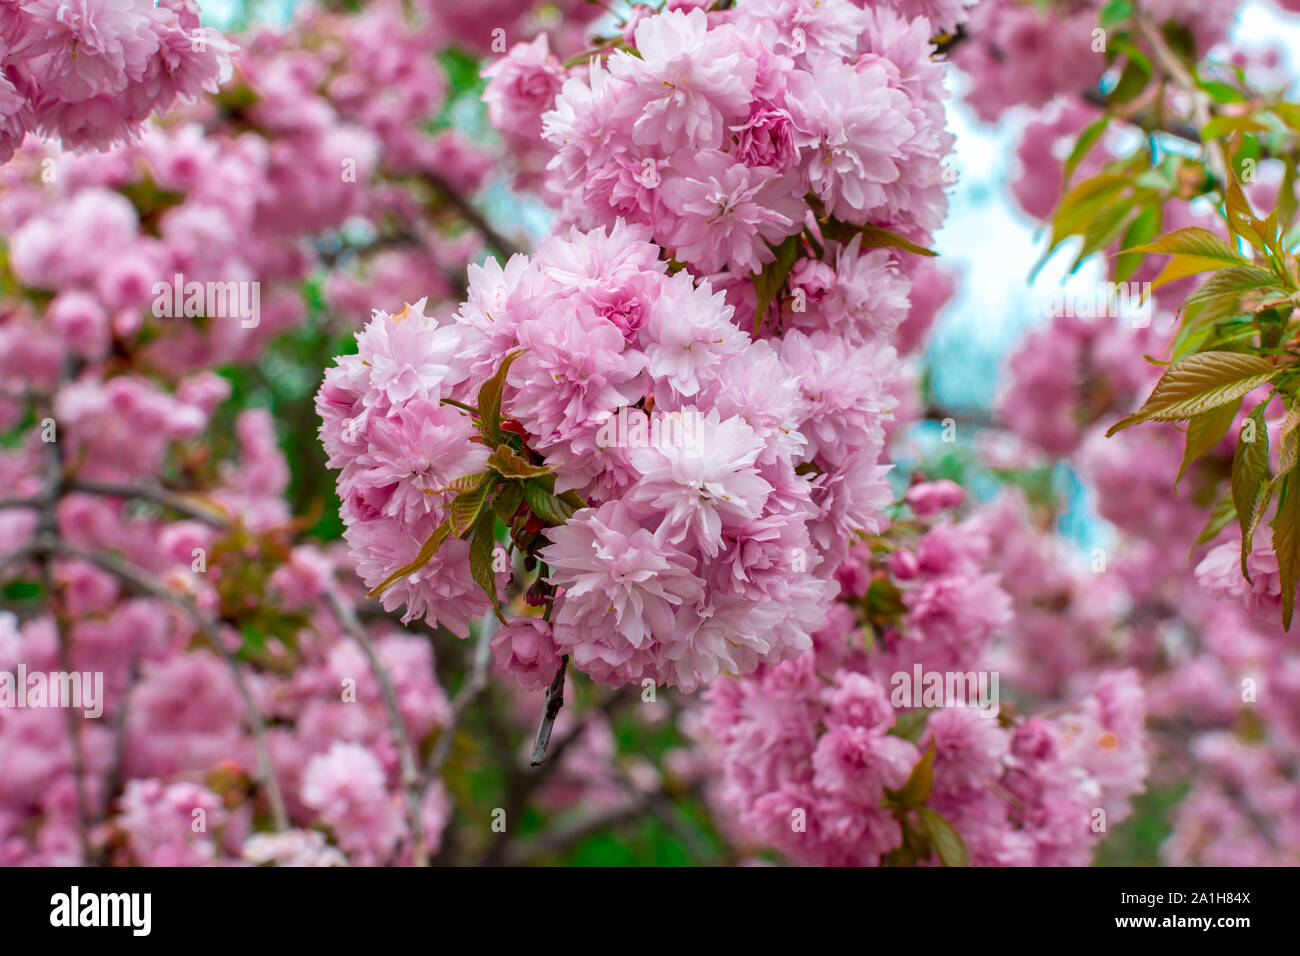 Blooming Louisiana, three-lobed almonds, soft pink lush flowers on a branch of a bush. Stock Photo